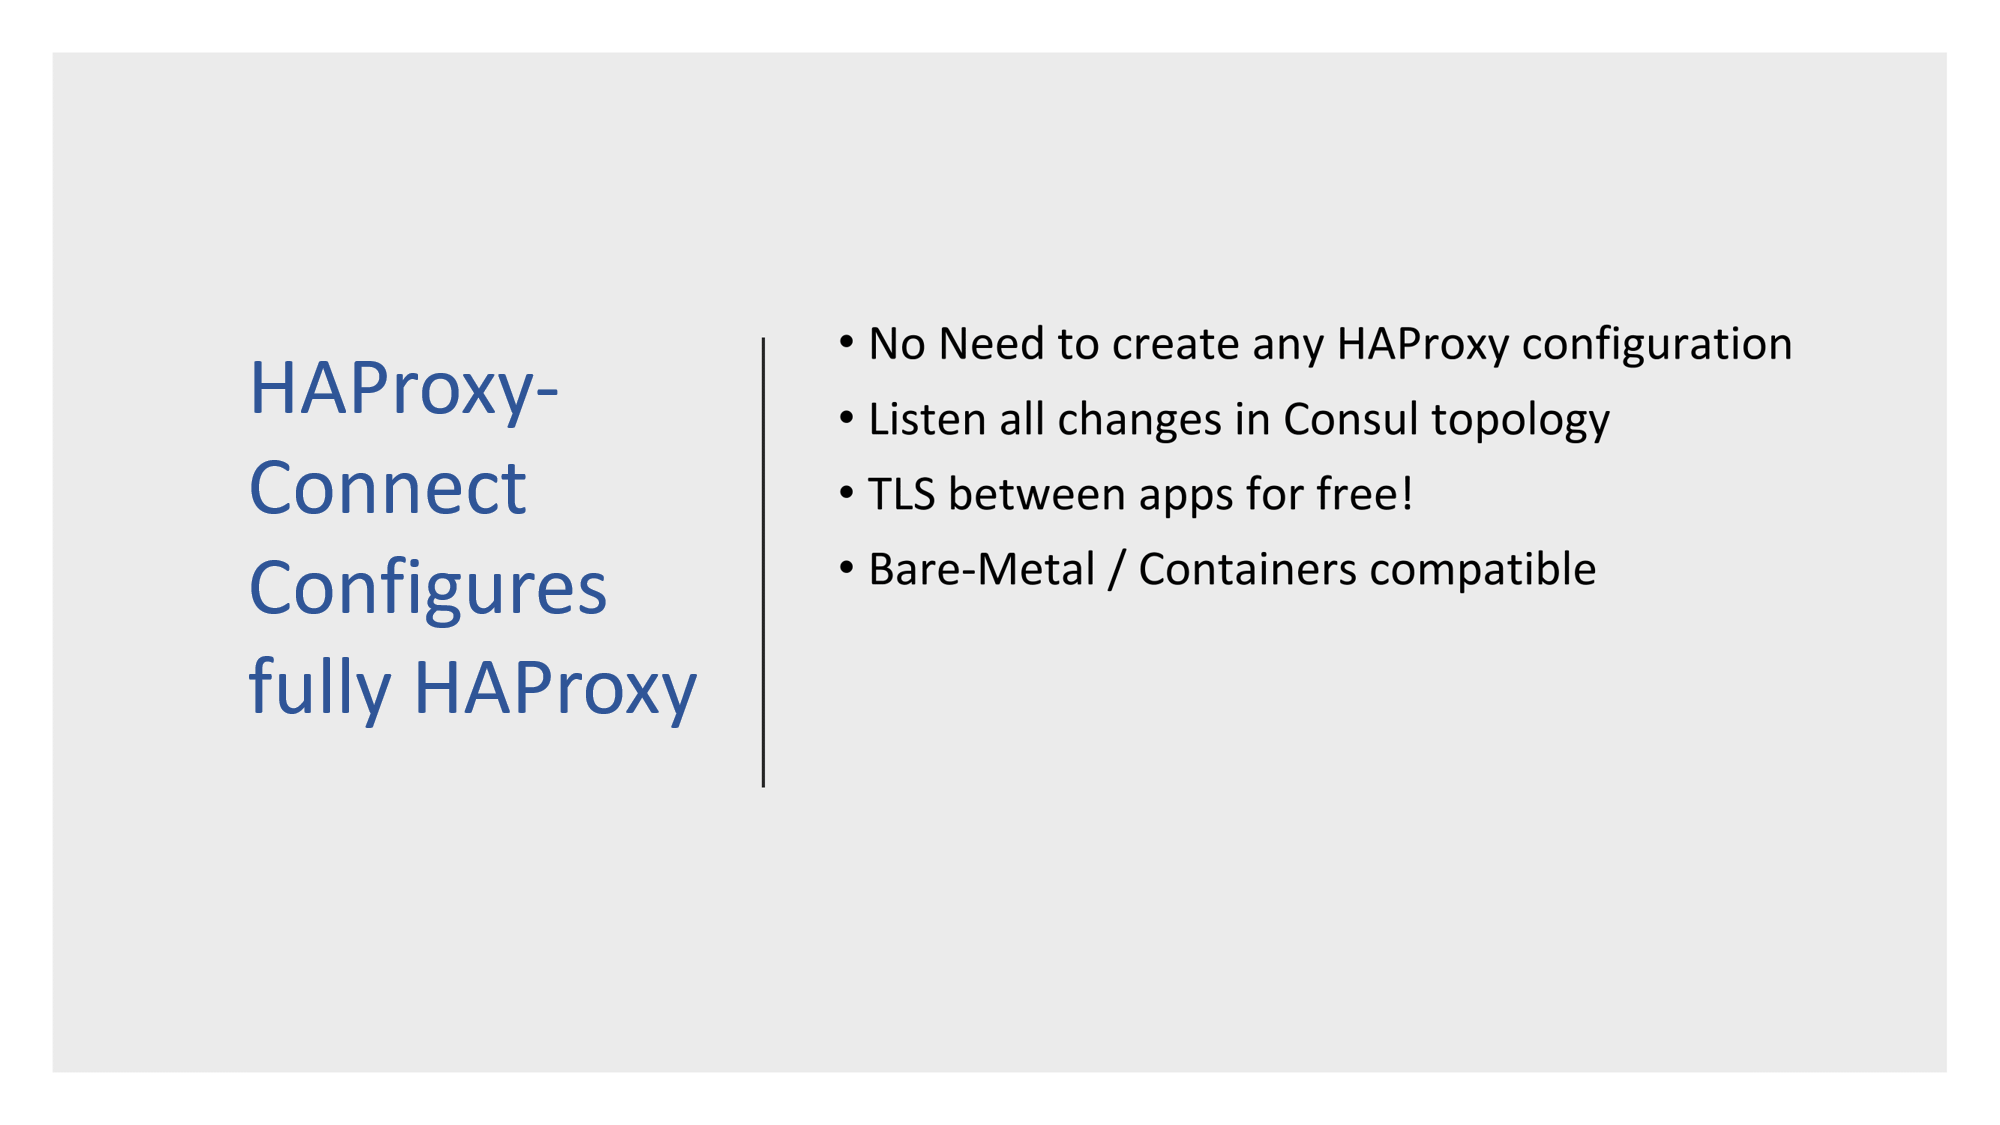 19.-haproxy-connect-configures-fully-haproxy